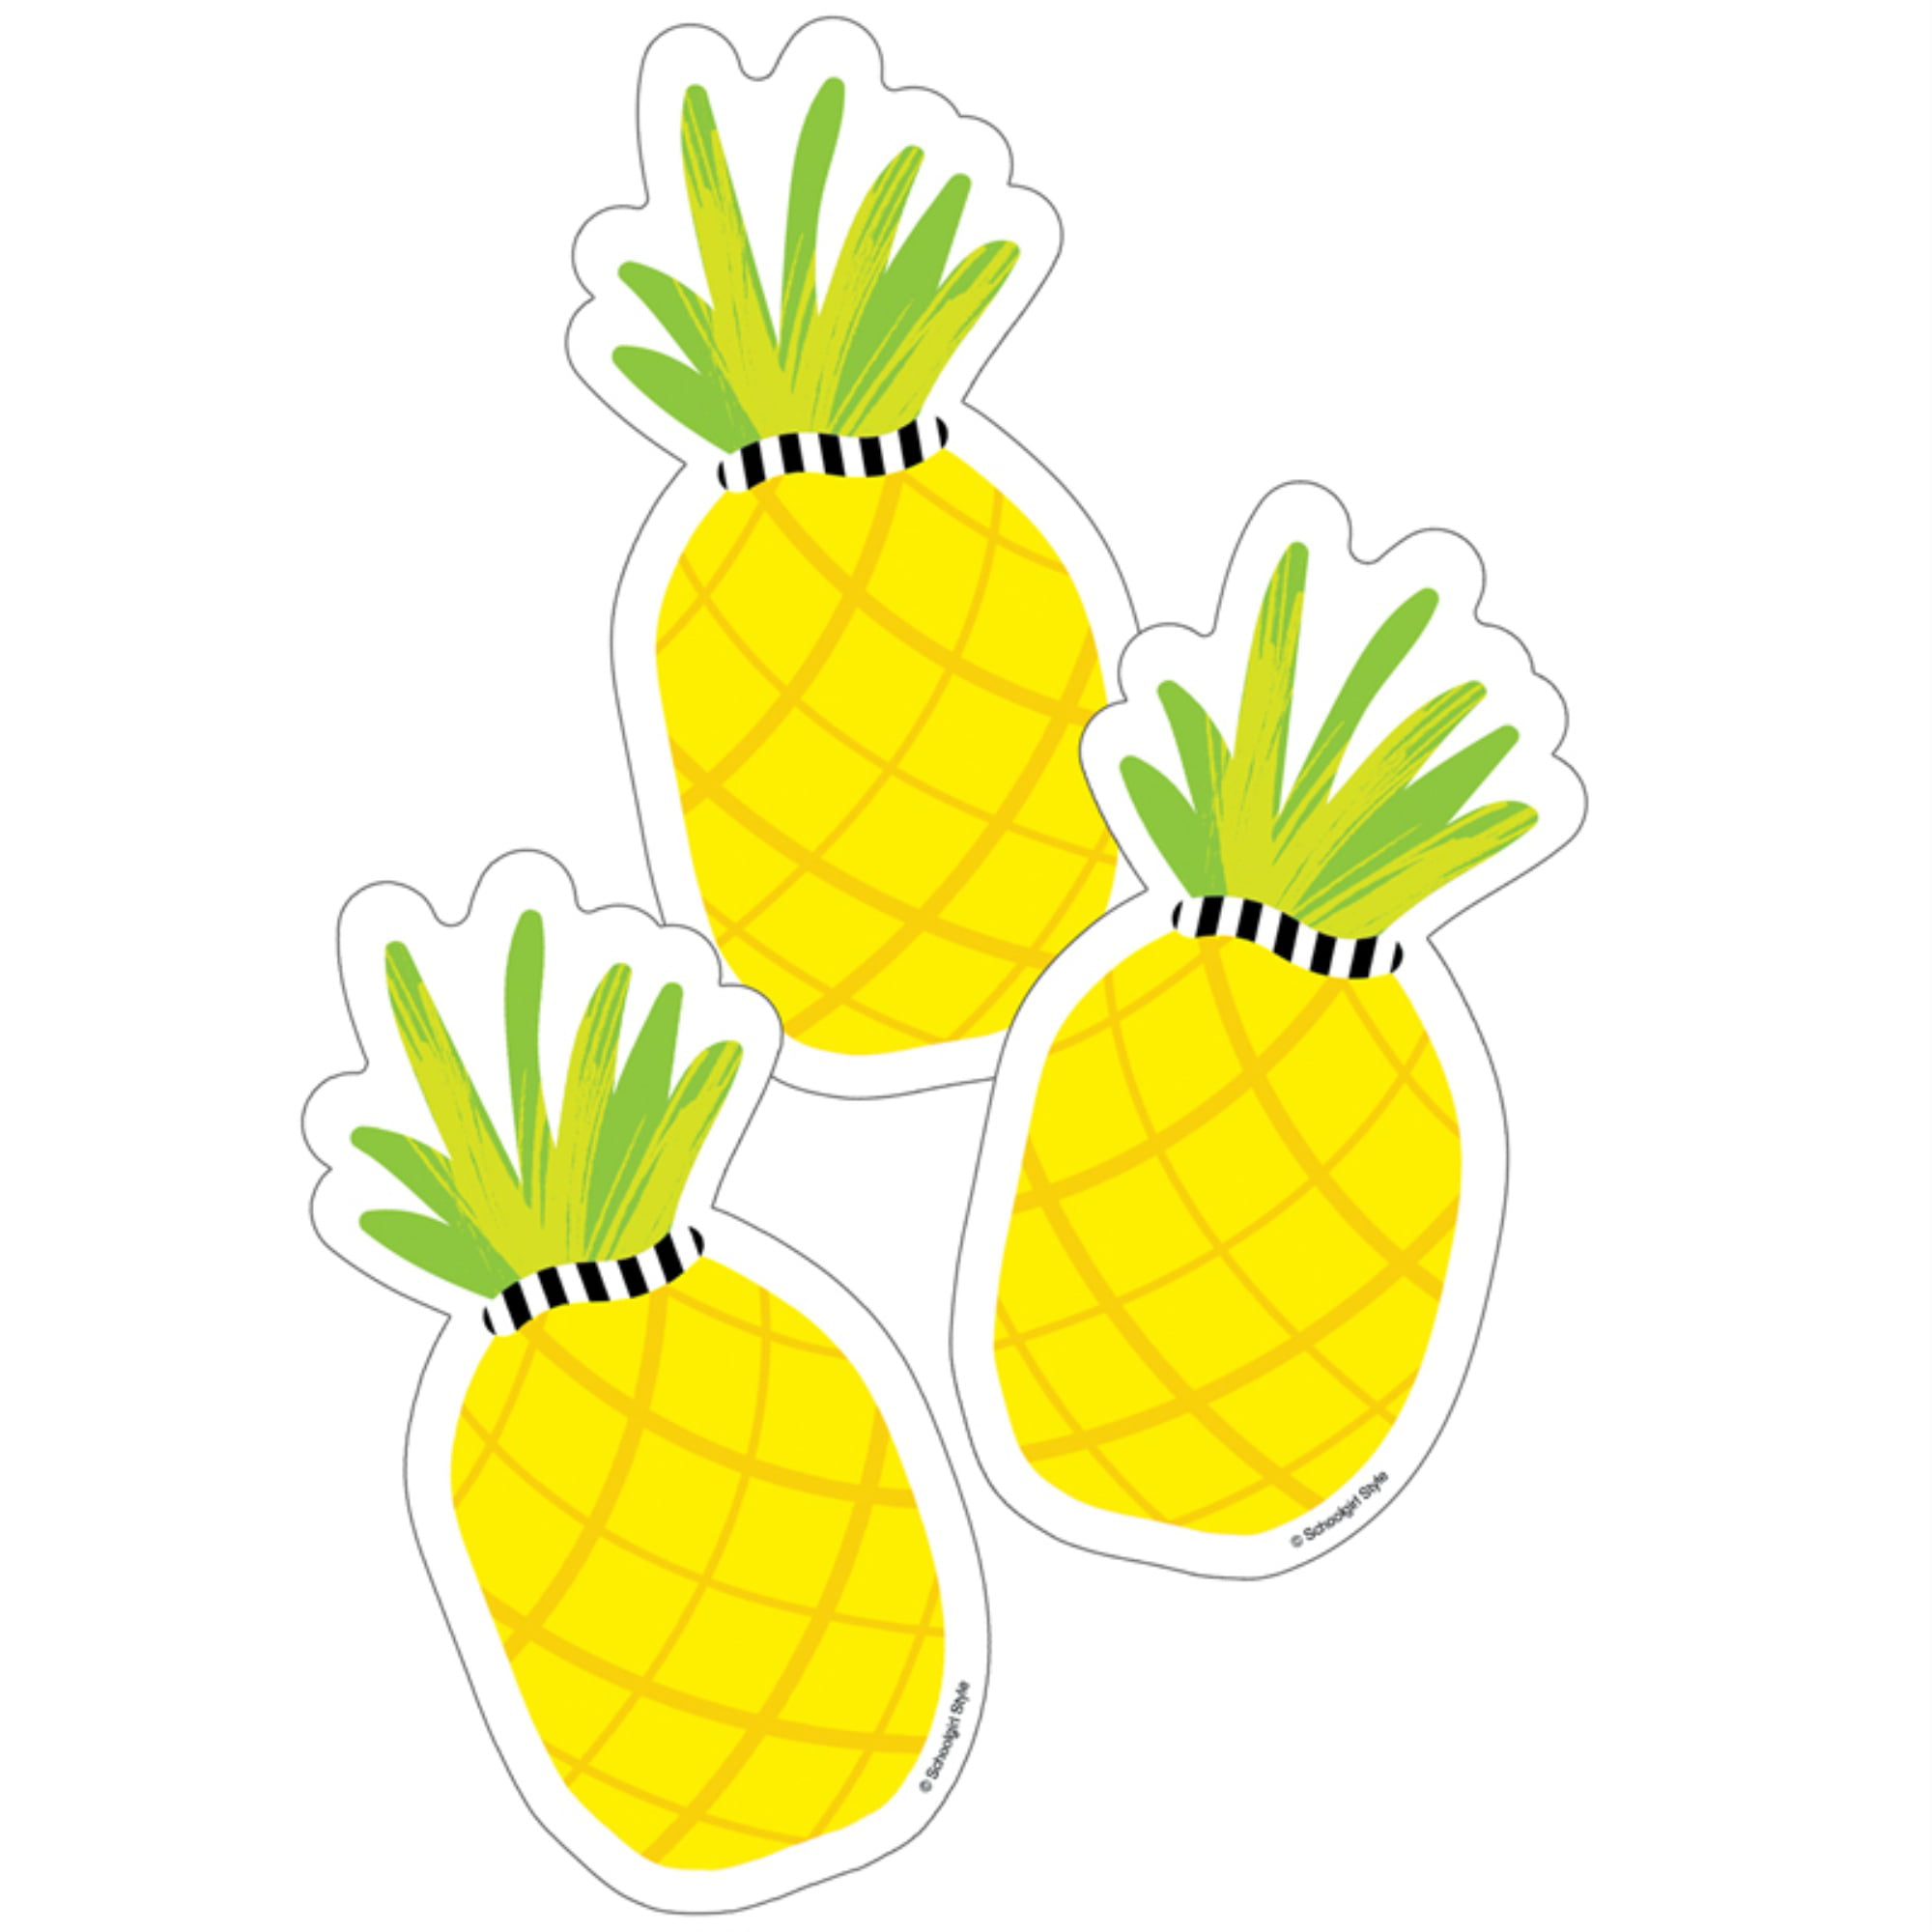 Simply Stylish Tropical Pineapple Cut-Outs, Pack of 36 | Bundle of 10 Packs  